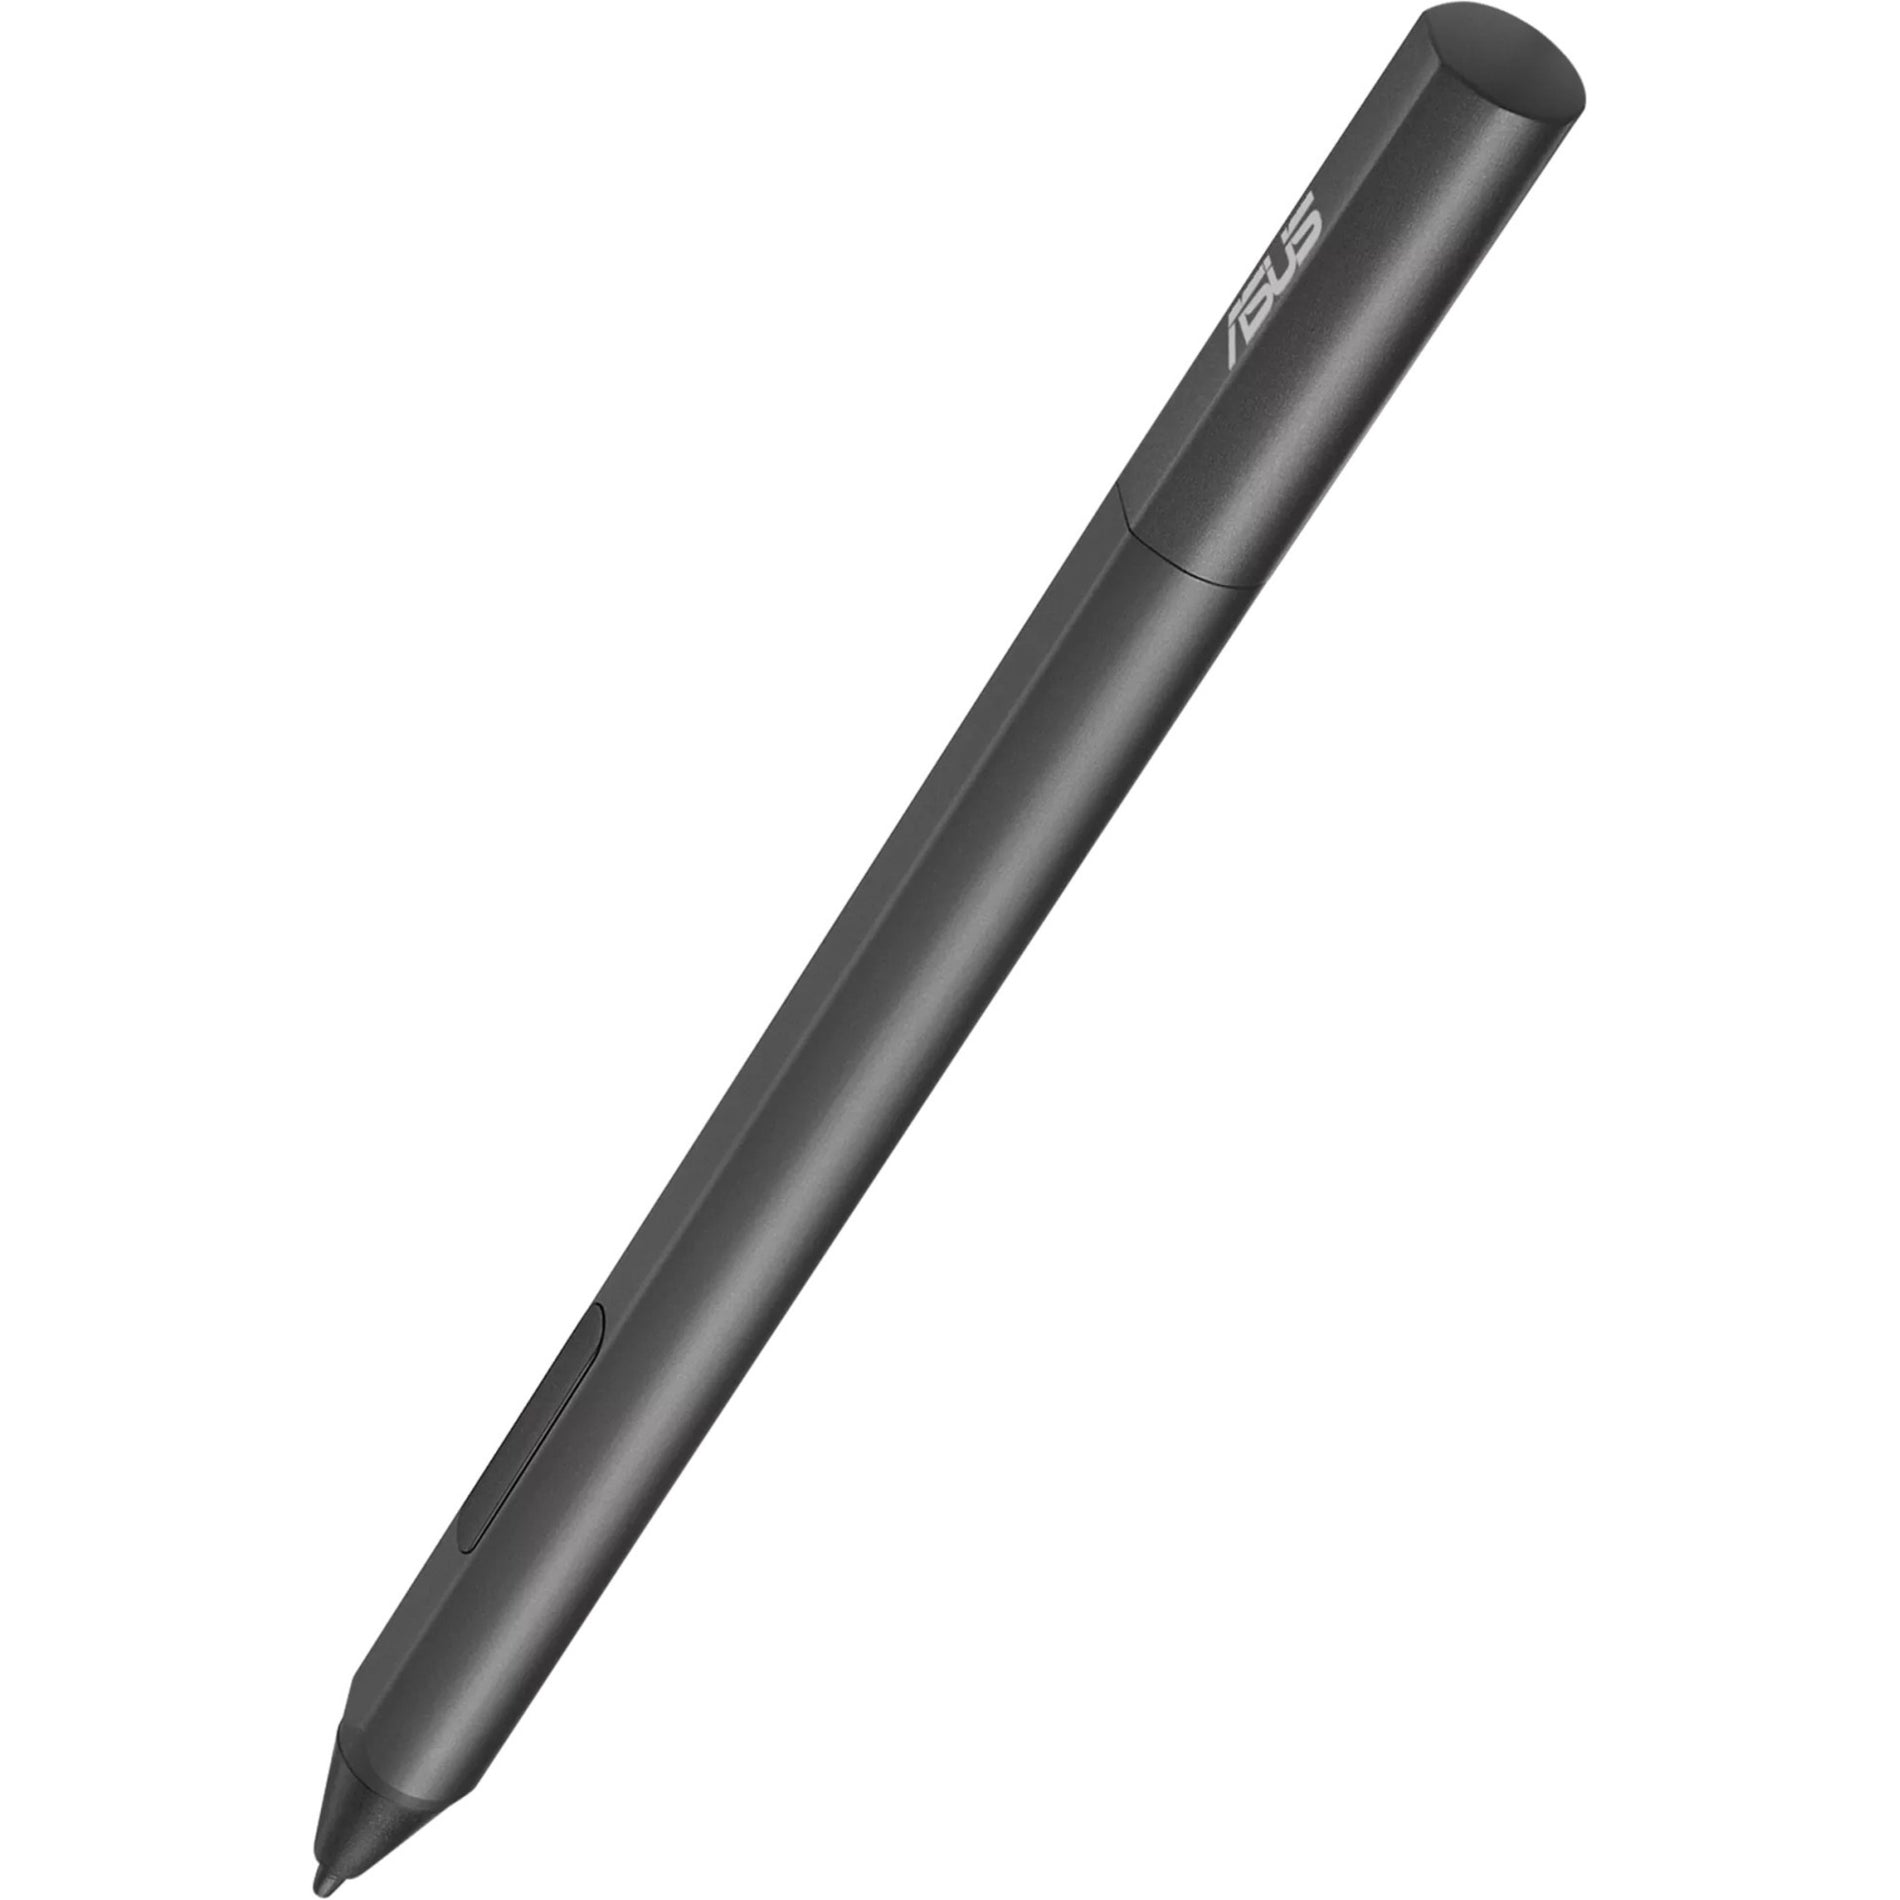 Asus 90XB06PN-MTO030 SA201H Stylus, Black - 1 Year Limited Warranty, 4096 Pressure Levels, RoHS Certified